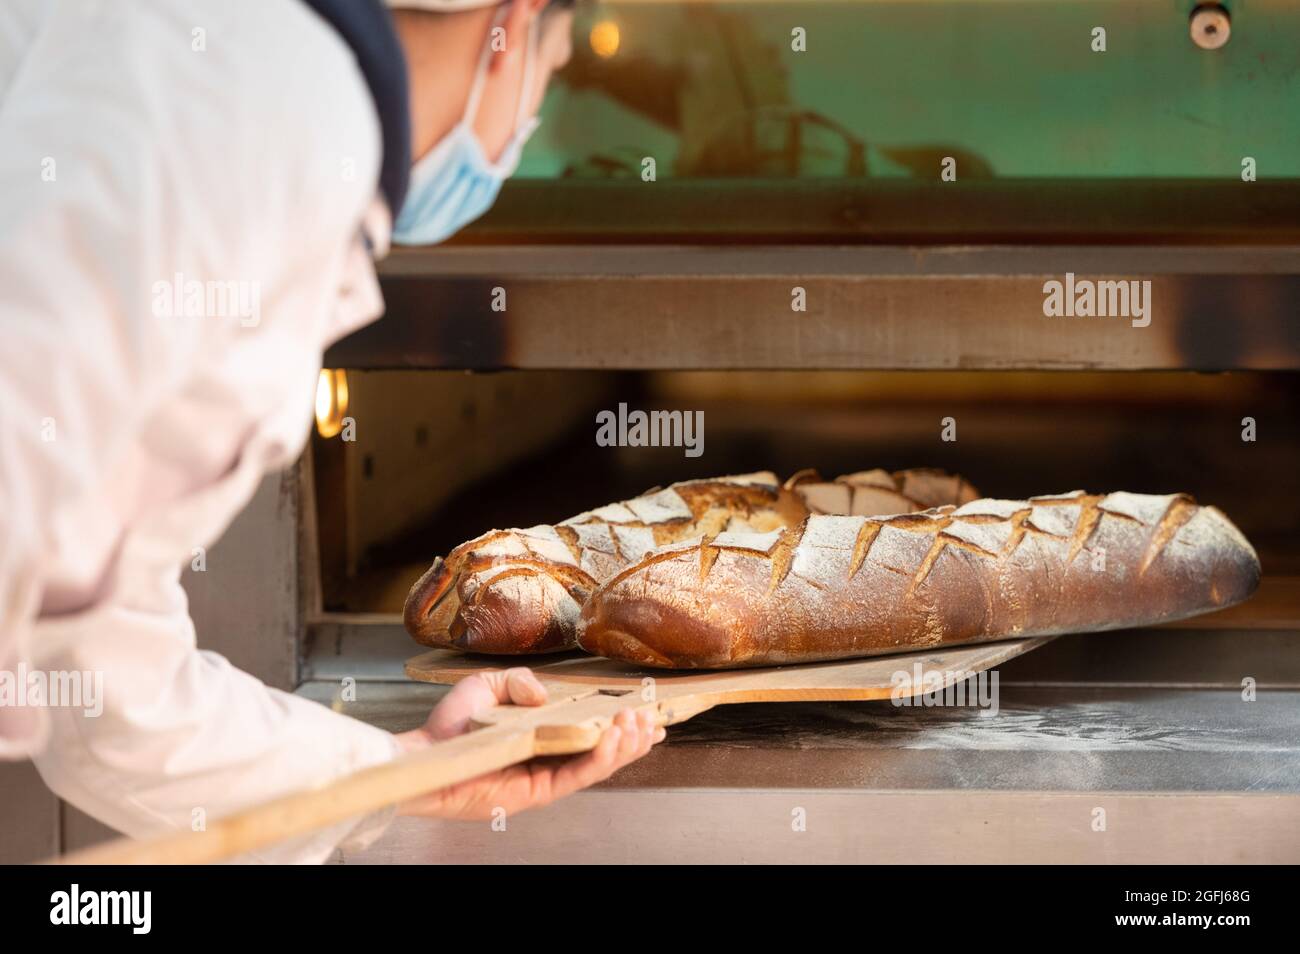 Super U supermarket : someone making bread Baker taking farmhouse bread out of the oven Stock Photo